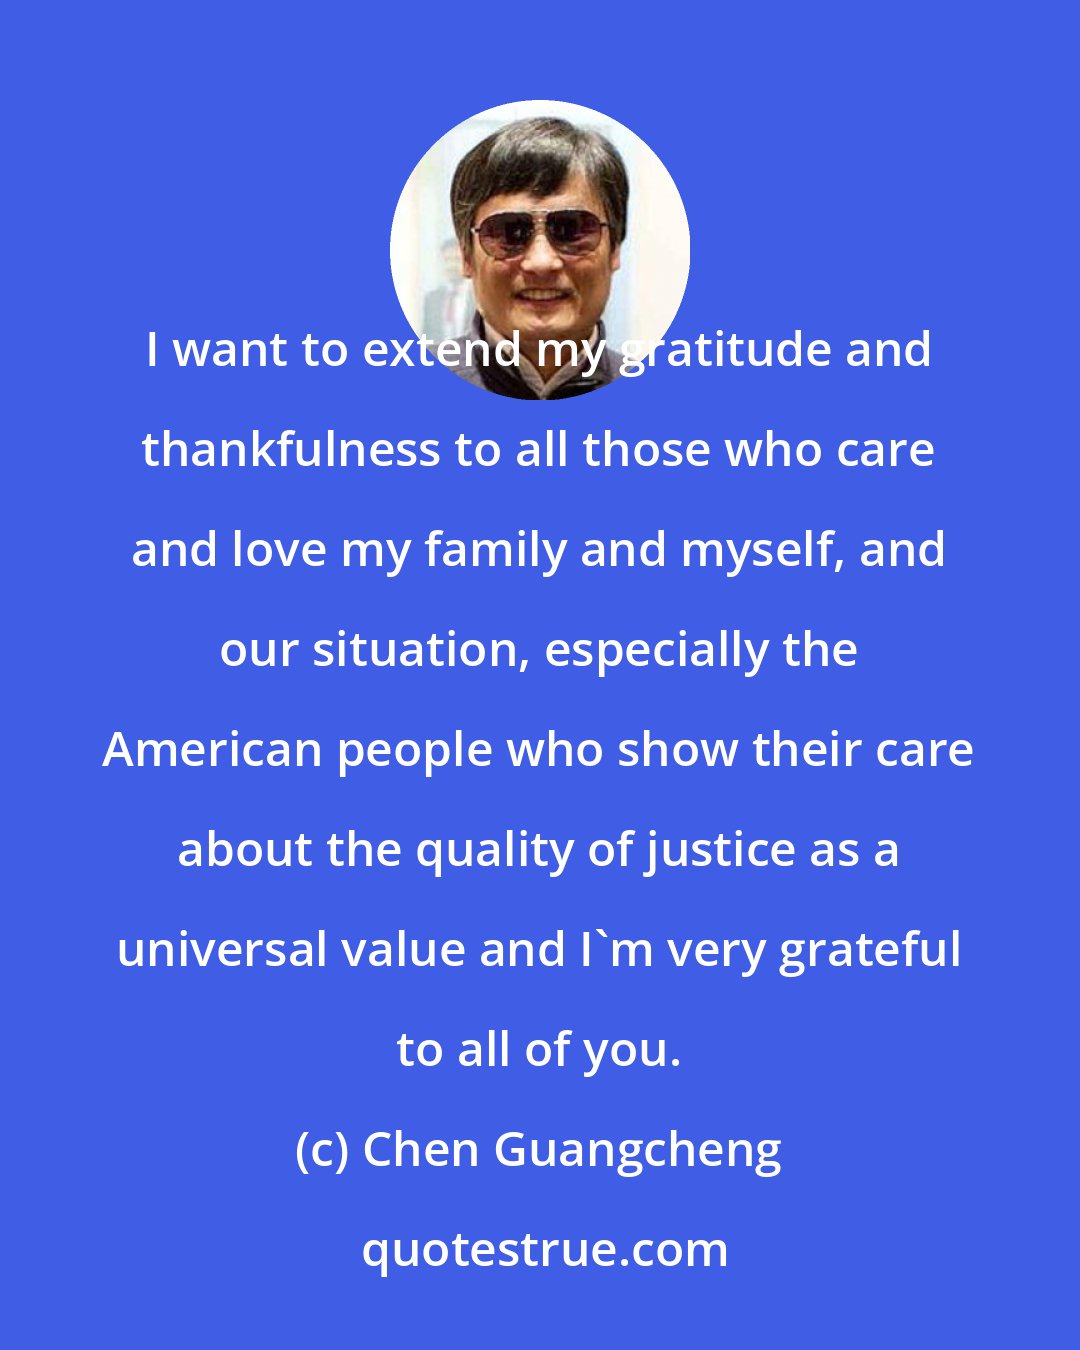 Chen Guangcheng: I want to extend my gratitude and thankfulness to all those who care and love my family and myself, and our situation, especially the American people who show their care about the quality of justice as a universal value and I'm very grateful to all of you.